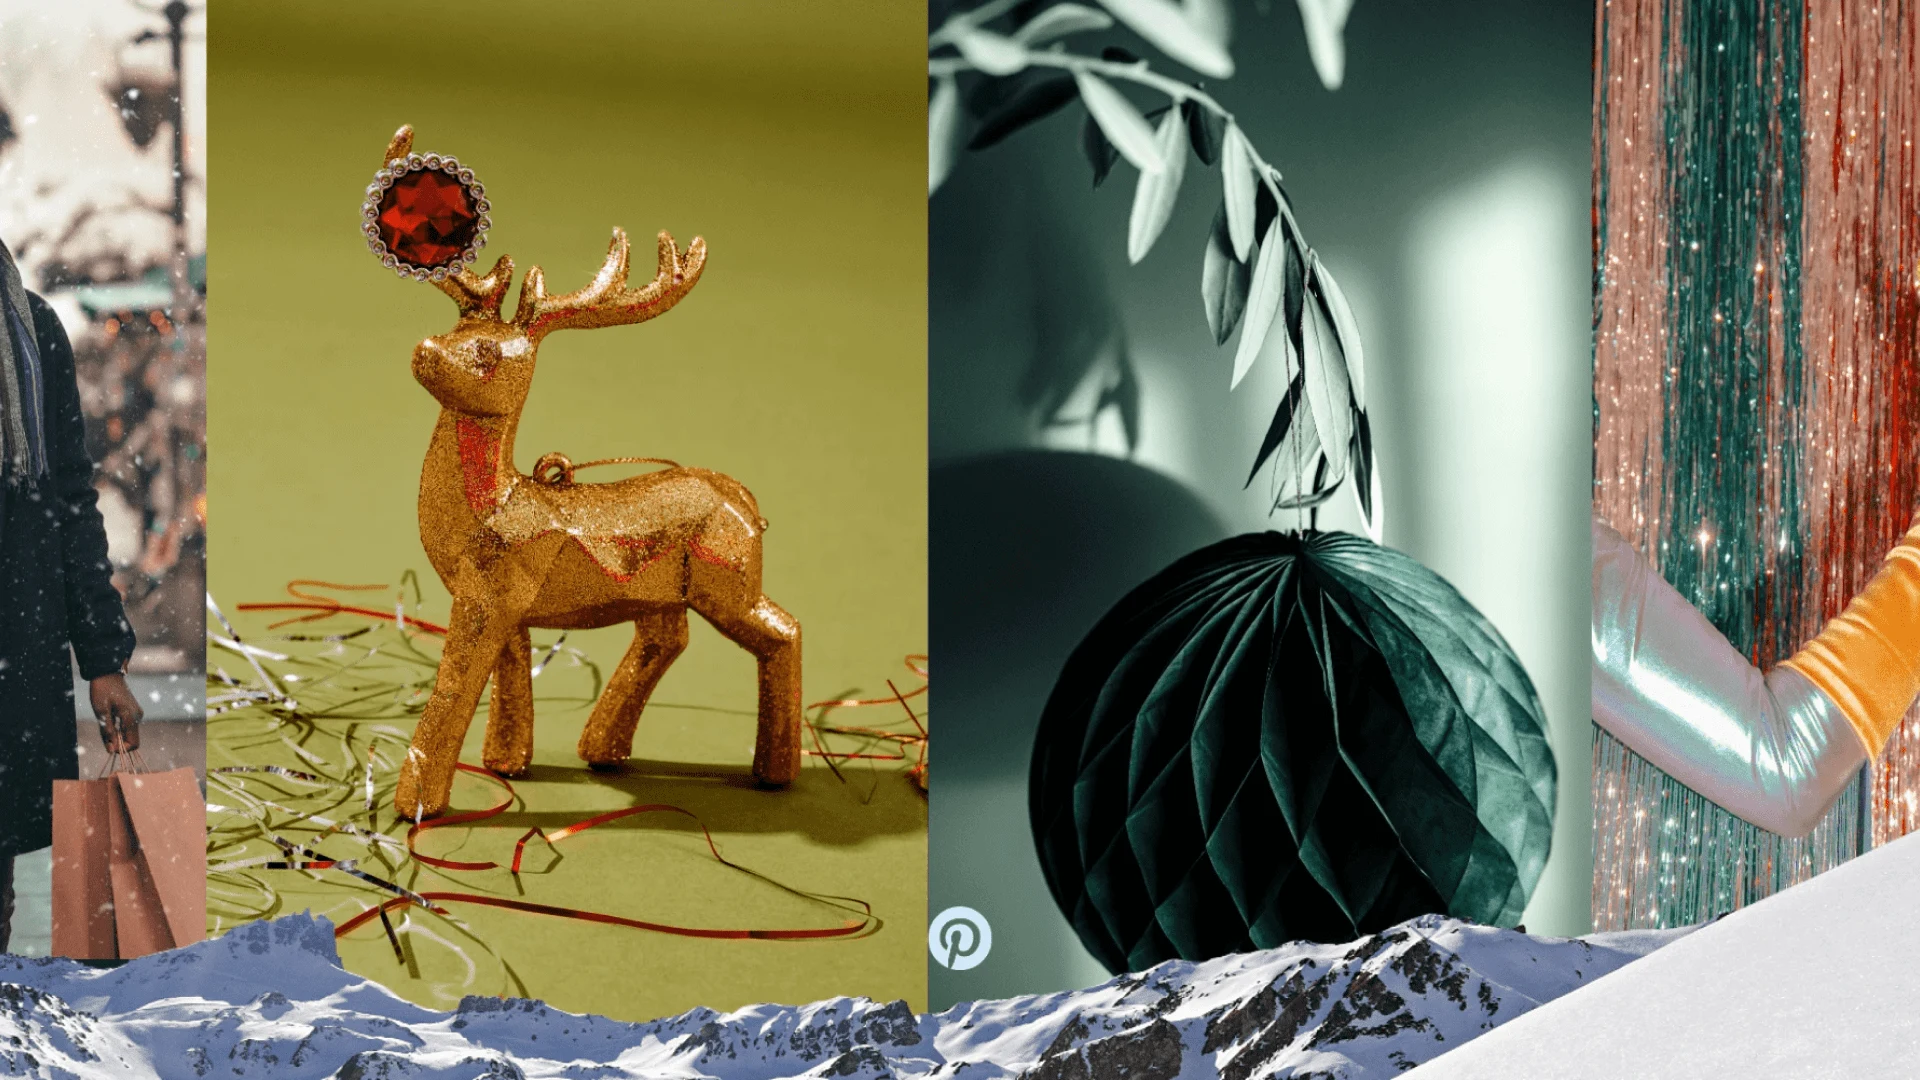  A collection of holiday-inspired images, including a golden reindeer figurine and a green ornament decoration